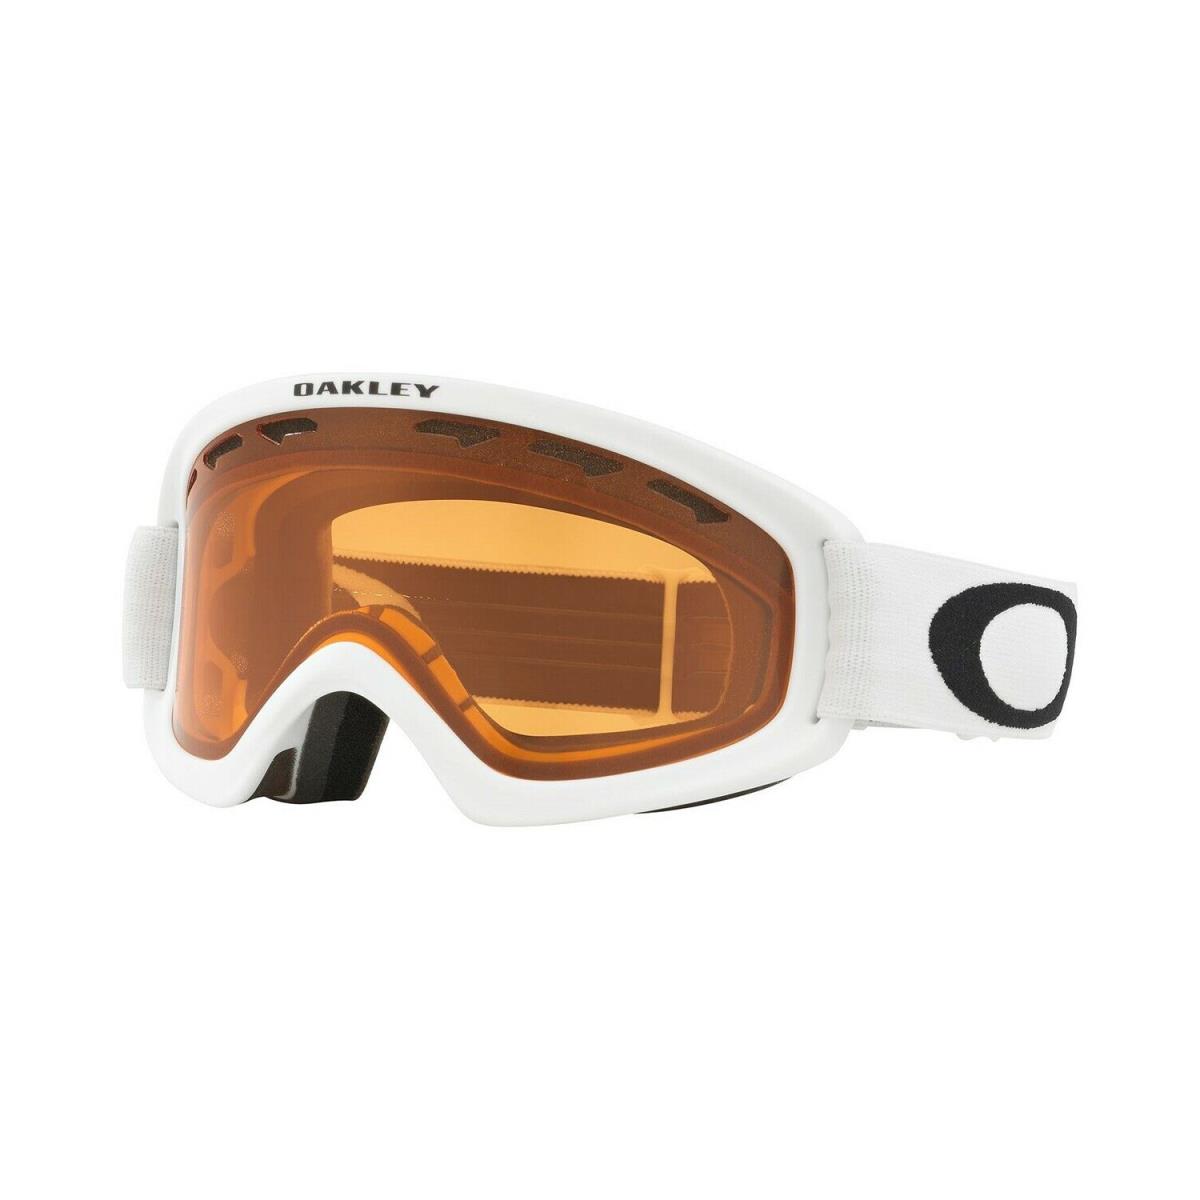 Oakley Snow Goggles 2.0 XS Matte White Youth Fit S2155 - Frame: White